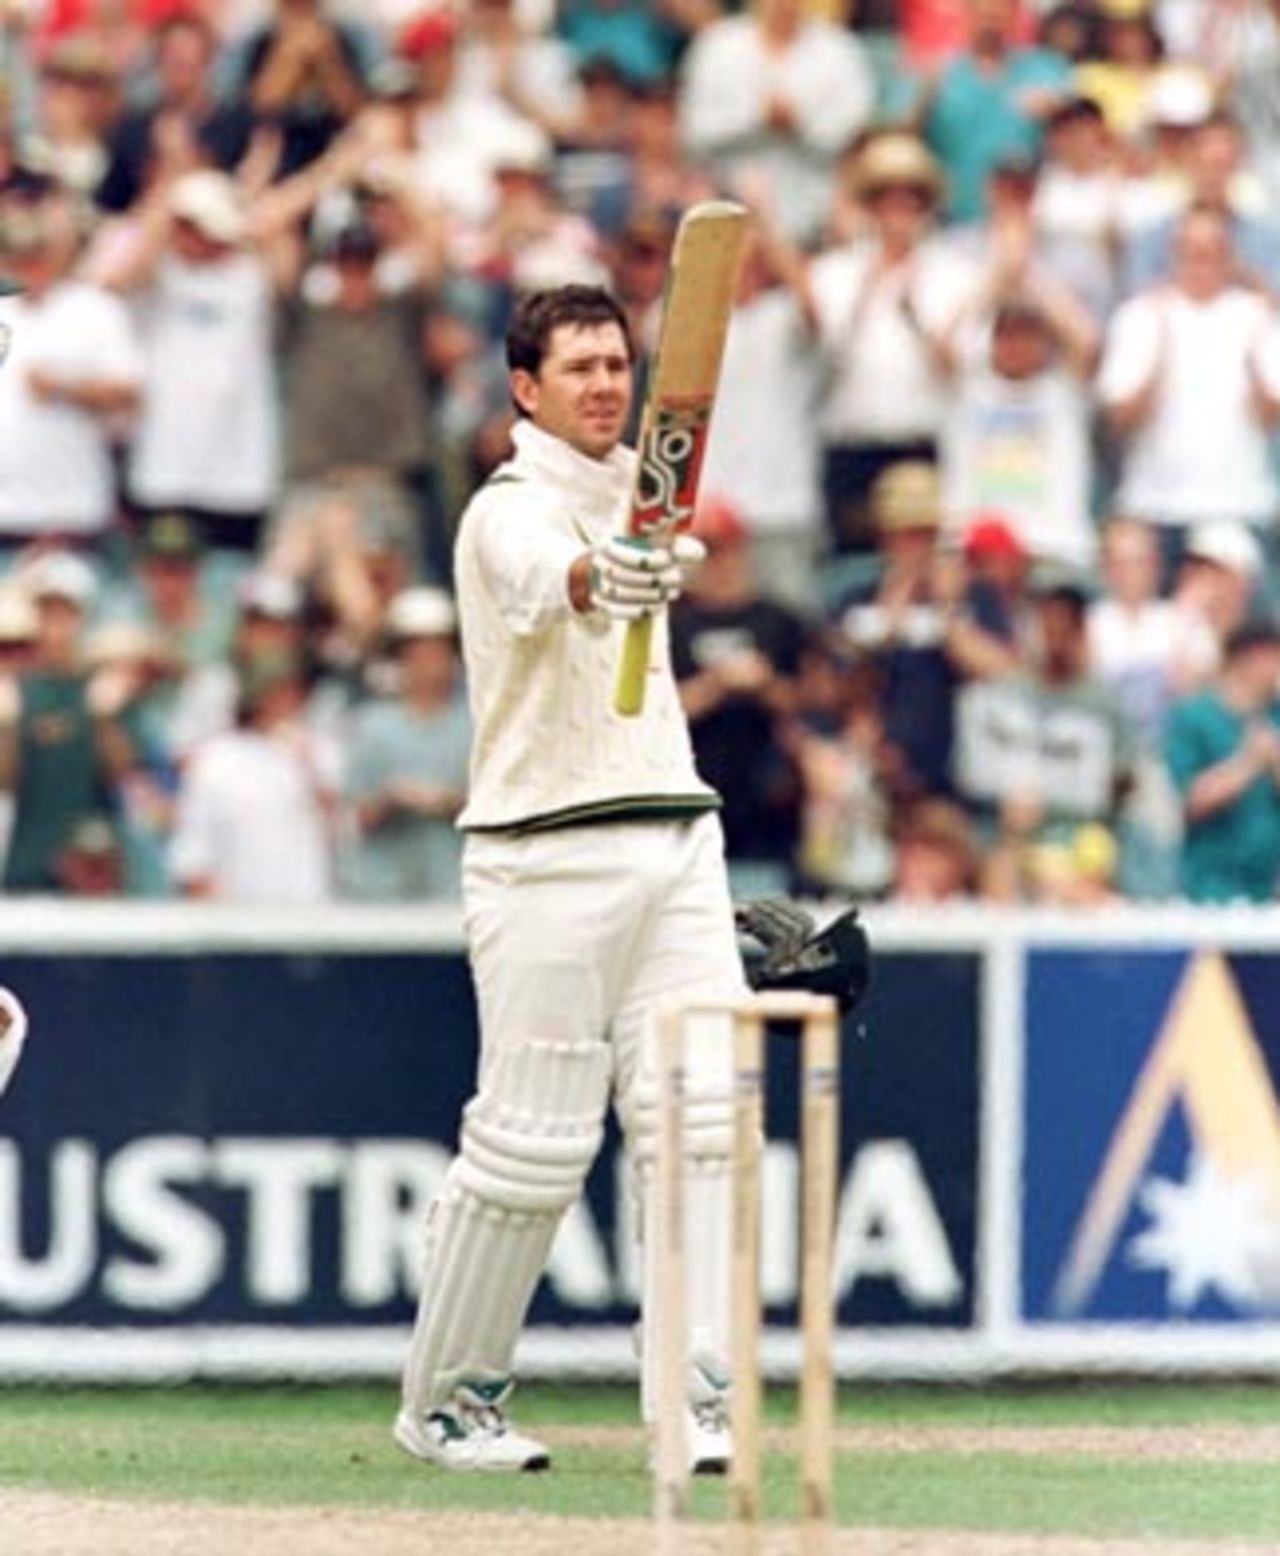 Ricky Ponting gets his 100 during the 2nd day of the Australia v South Africa Test match at the MCG in Melbourne. December 27th 1997.